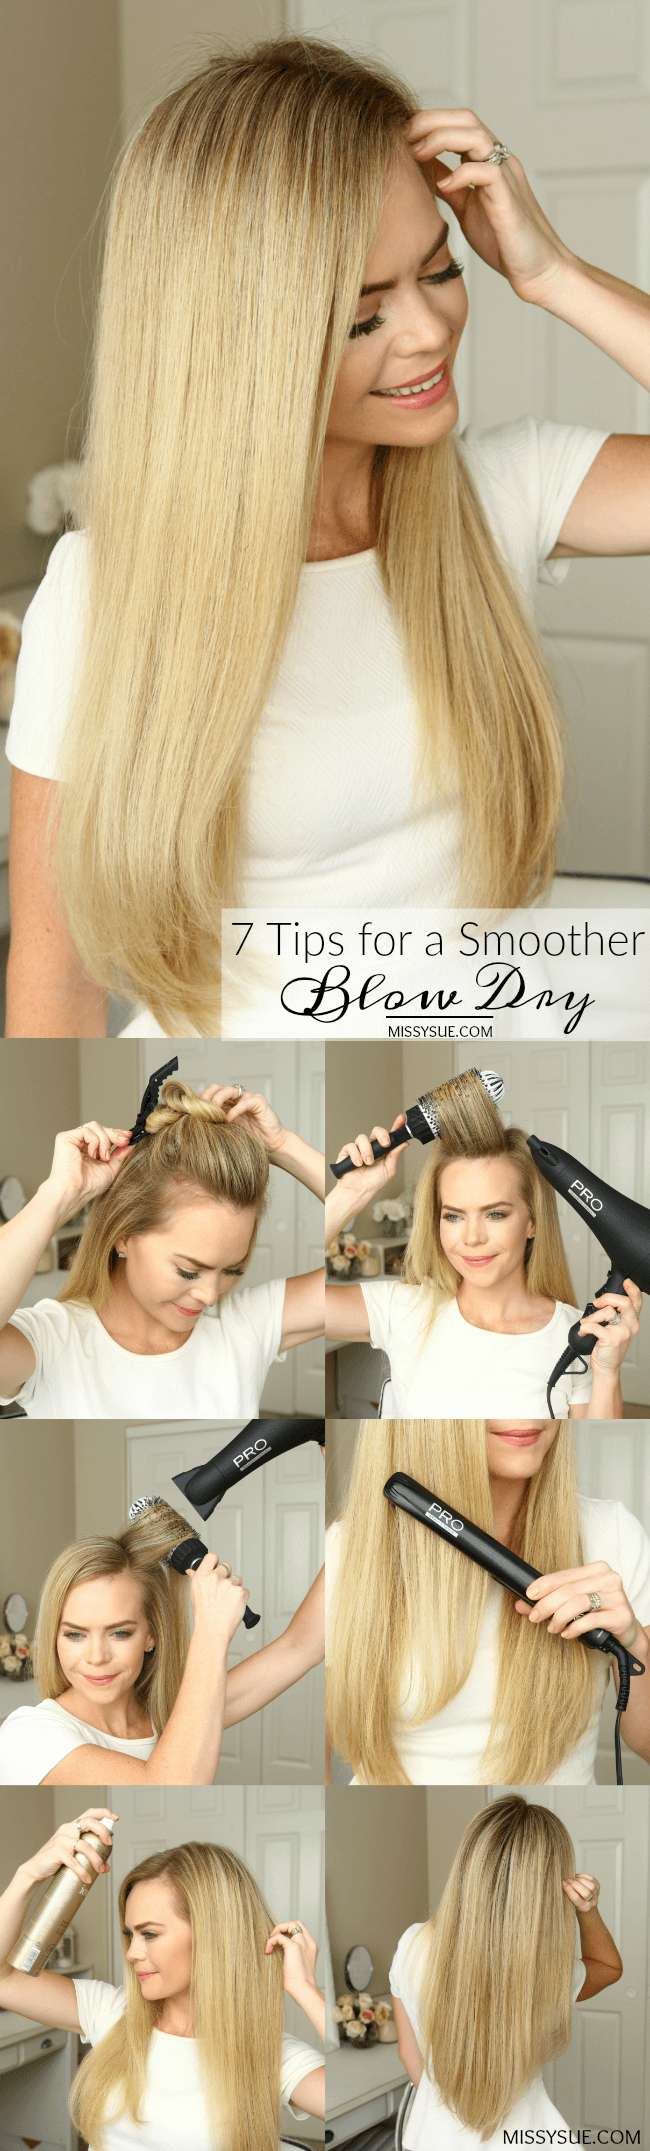 easy-tips-smooth-blow-dry-hair-tutorial